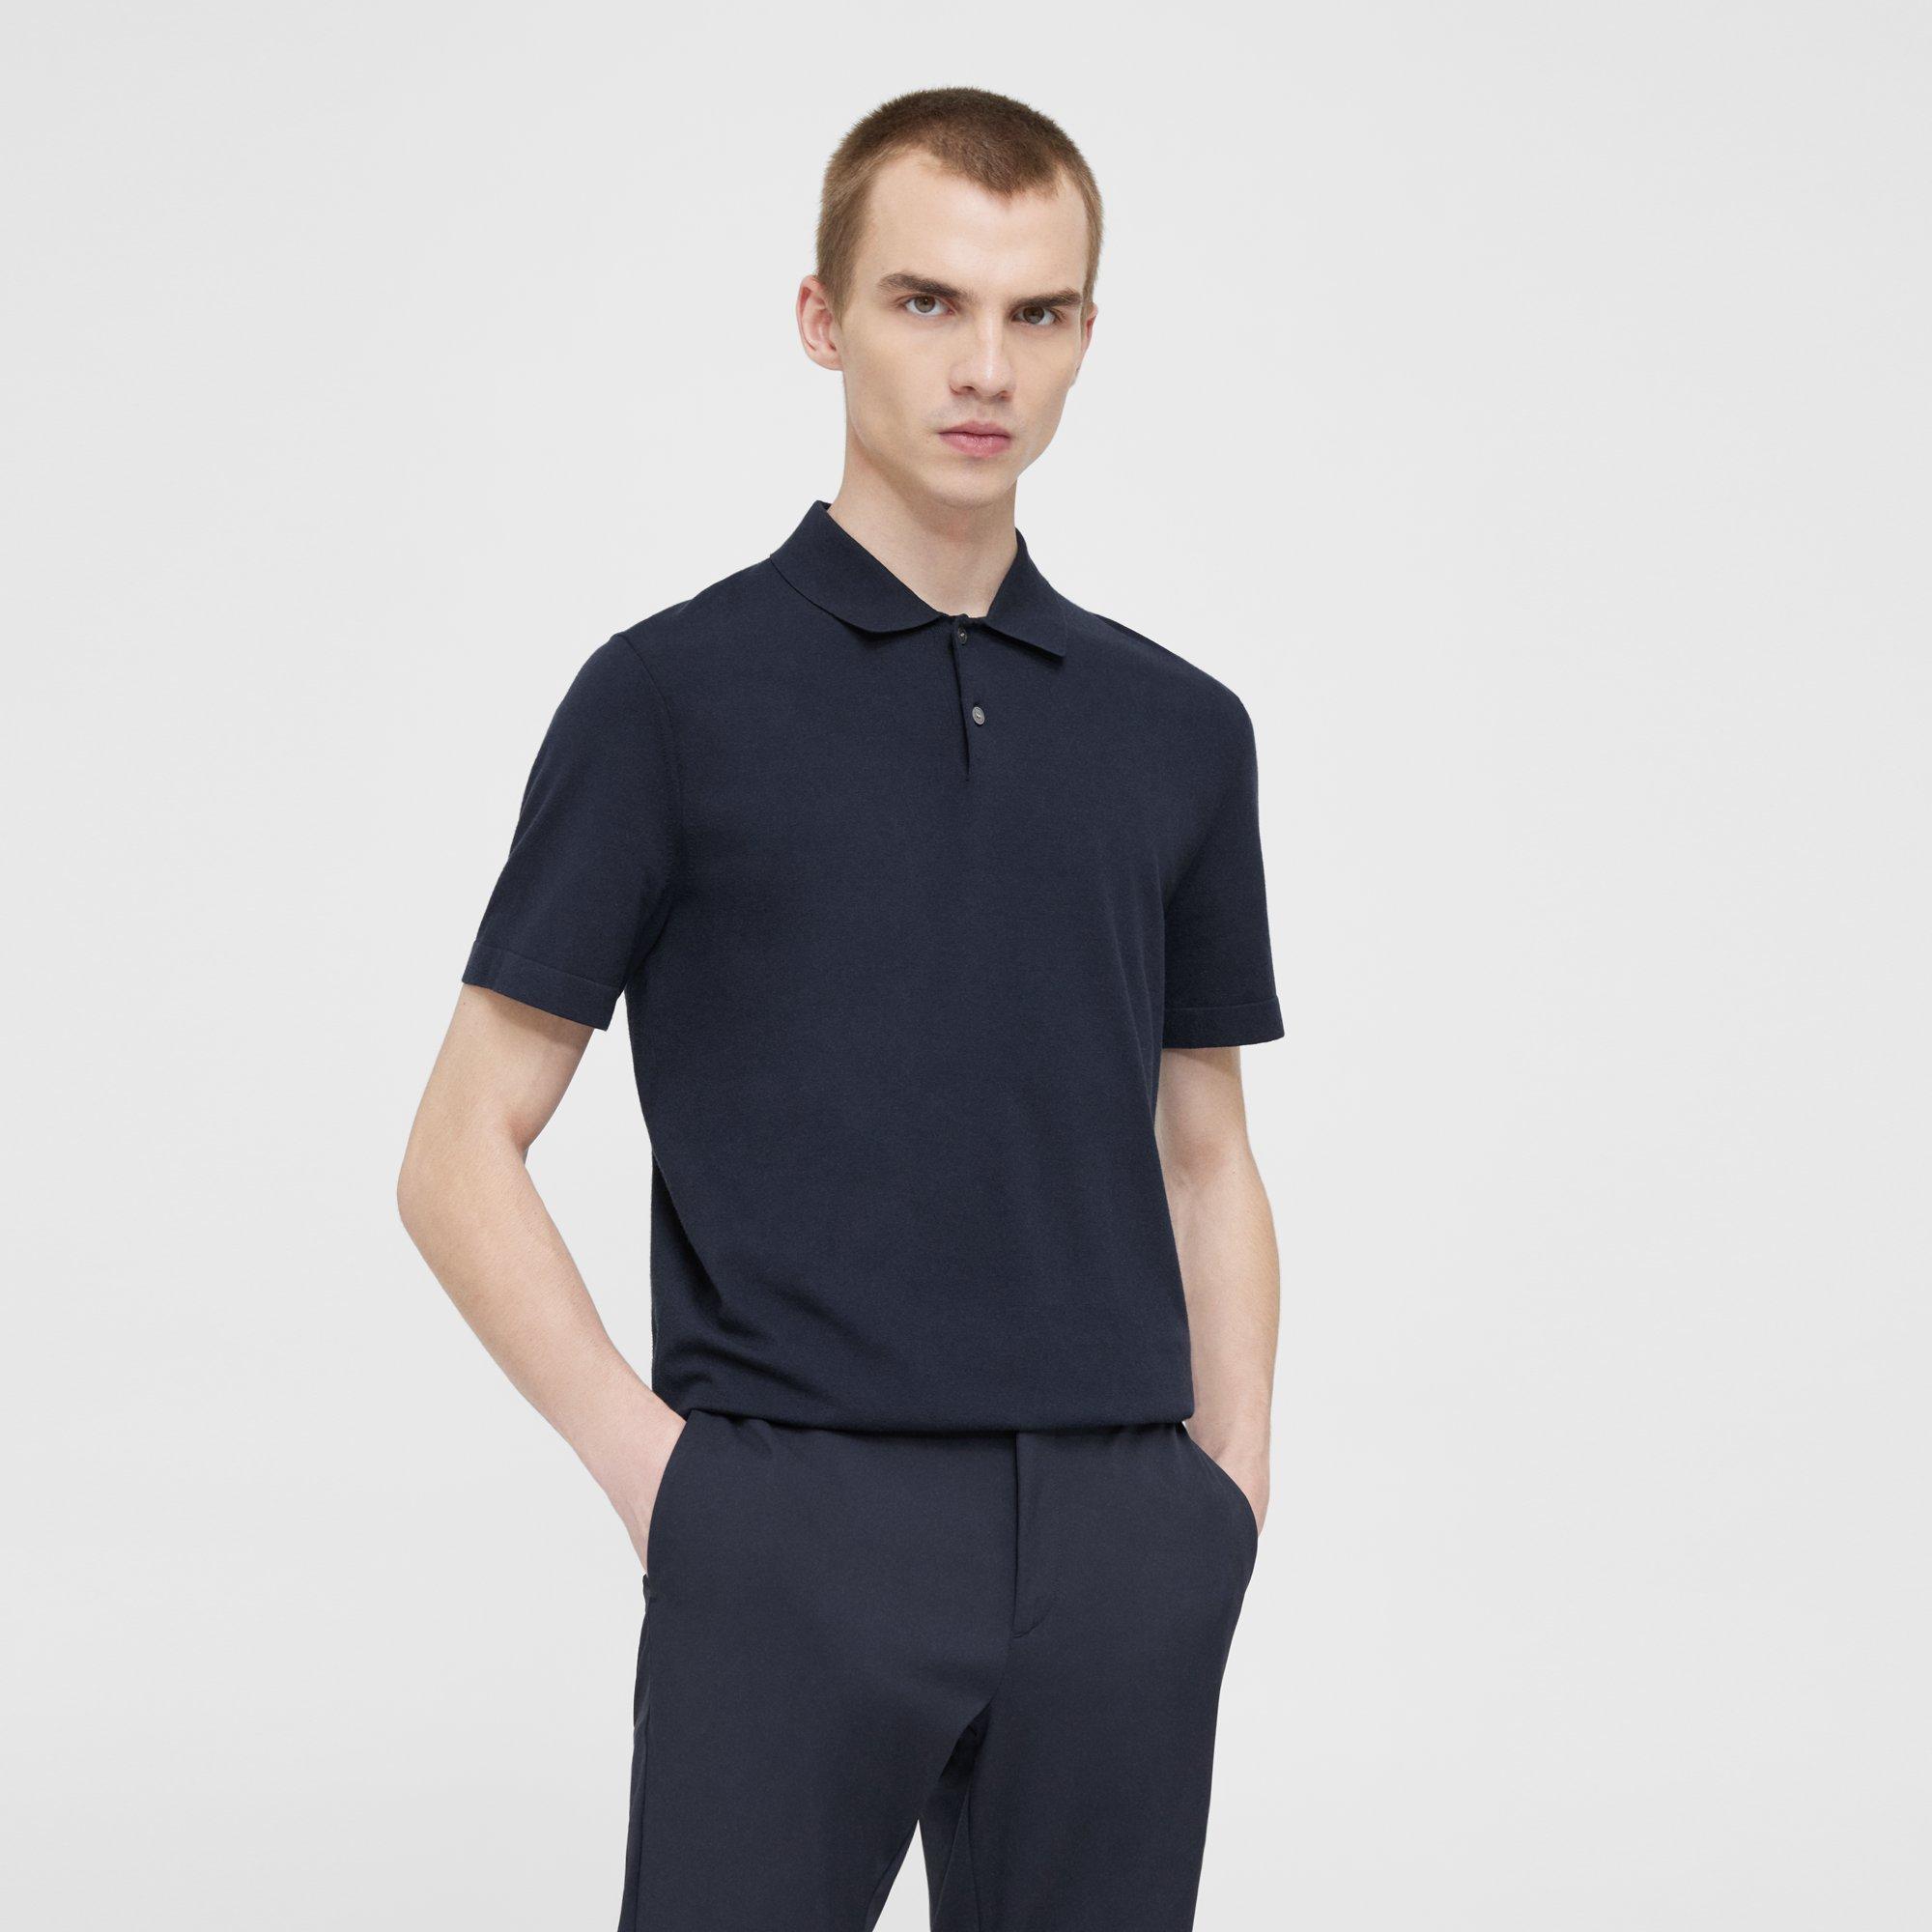 Men's T-Shirts and Polos| Theory